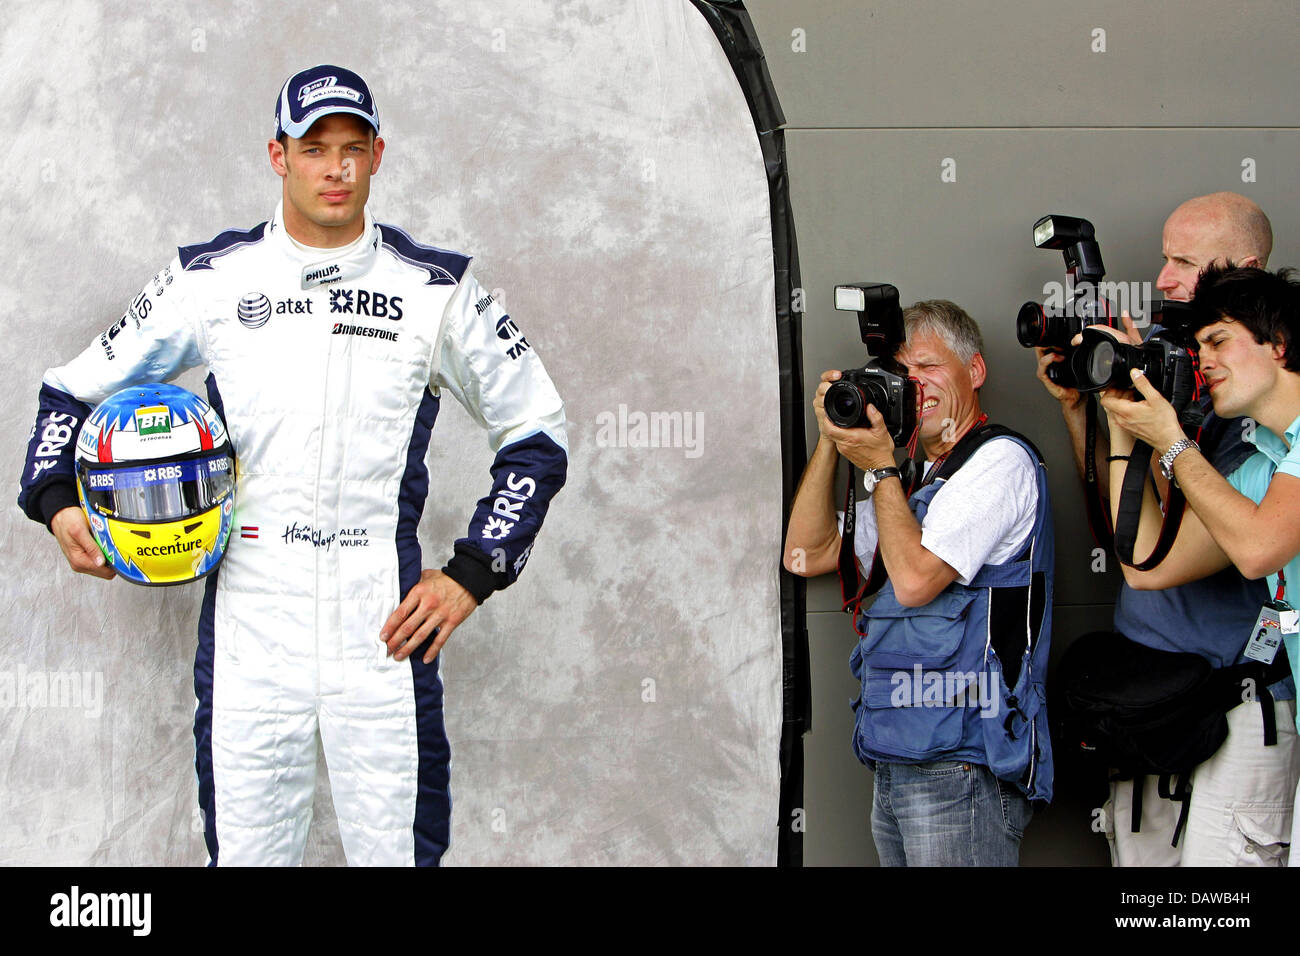 Austrian Formula One pilot Alexander Wurz of Williams F1 Team poses for the cameras at the official photo session to the 2007 Formula 1 Australian Grand Prix at the Albert Park race track in Melbourne, Australia, Thursday 15 March 2007. he first Grand Prix of the 2007 Formula 1 season will take place in Melbourne on Sunday 18 March. Photo: BERND THISSEN Stock Photo